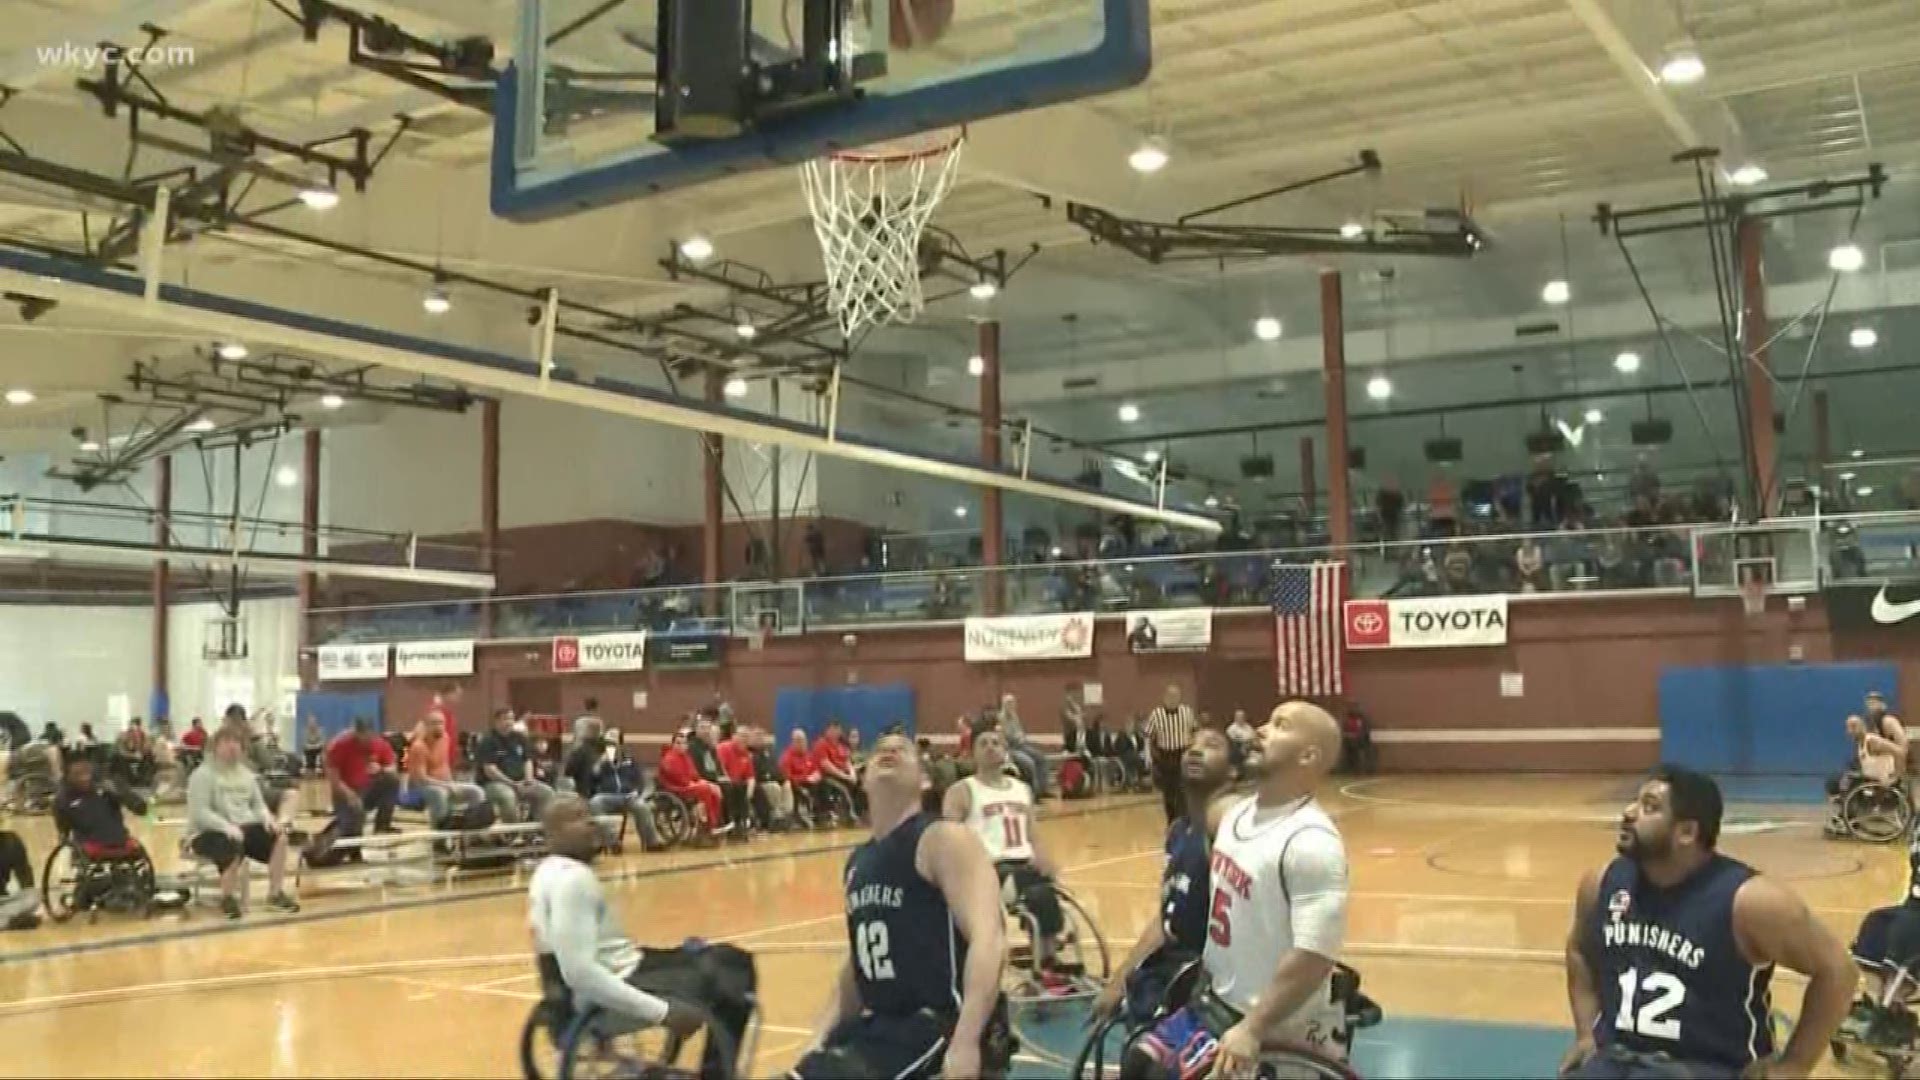 The National Wheelchair Basketball Association brought it’s national tournament to Tallmadge’s Recreation Center. Ray Strickland reports